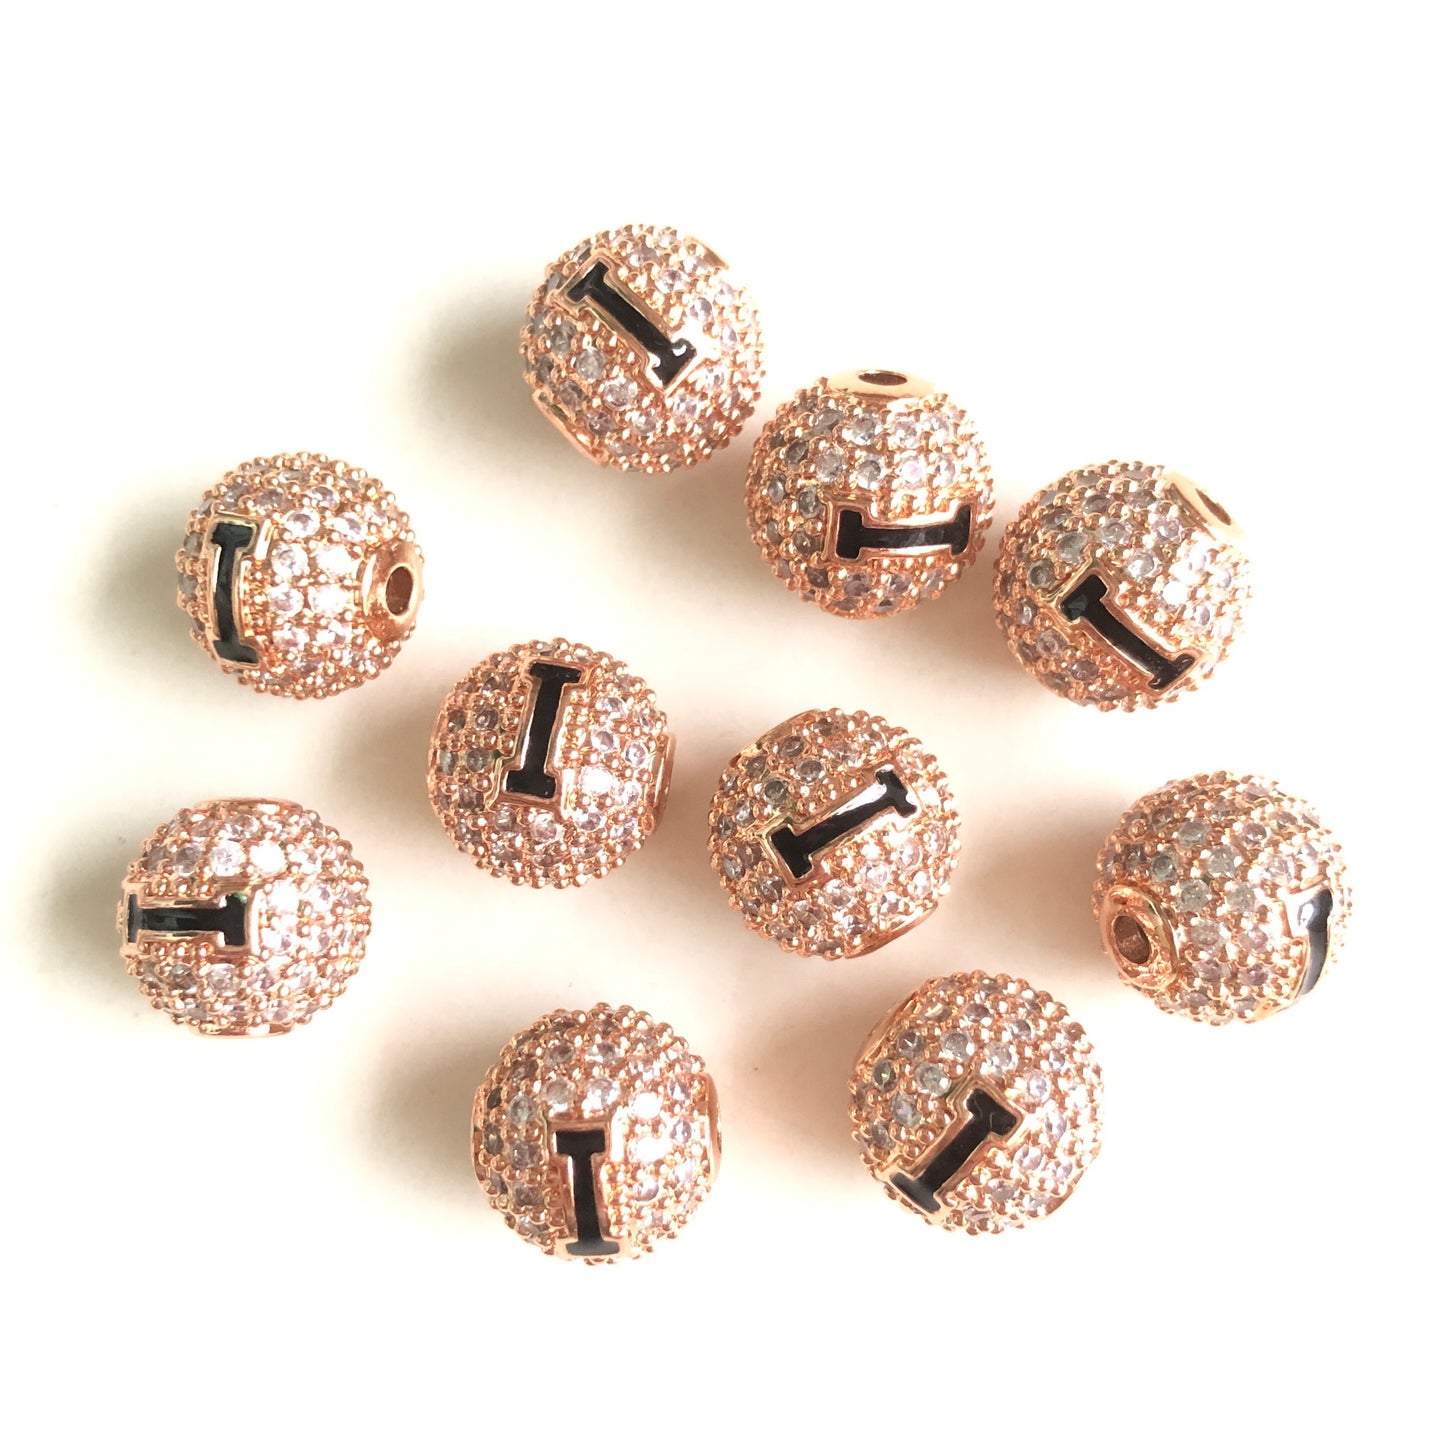 10-20pcs/lot 10mm Enamel Print CZ Paved "I" Initial Alphabet Letter Ball Spacers Beads Rose Gold CZ Paved Spacers 10mm Beads Ball Beads New Spacers Arrivals Charms Beads Beyond